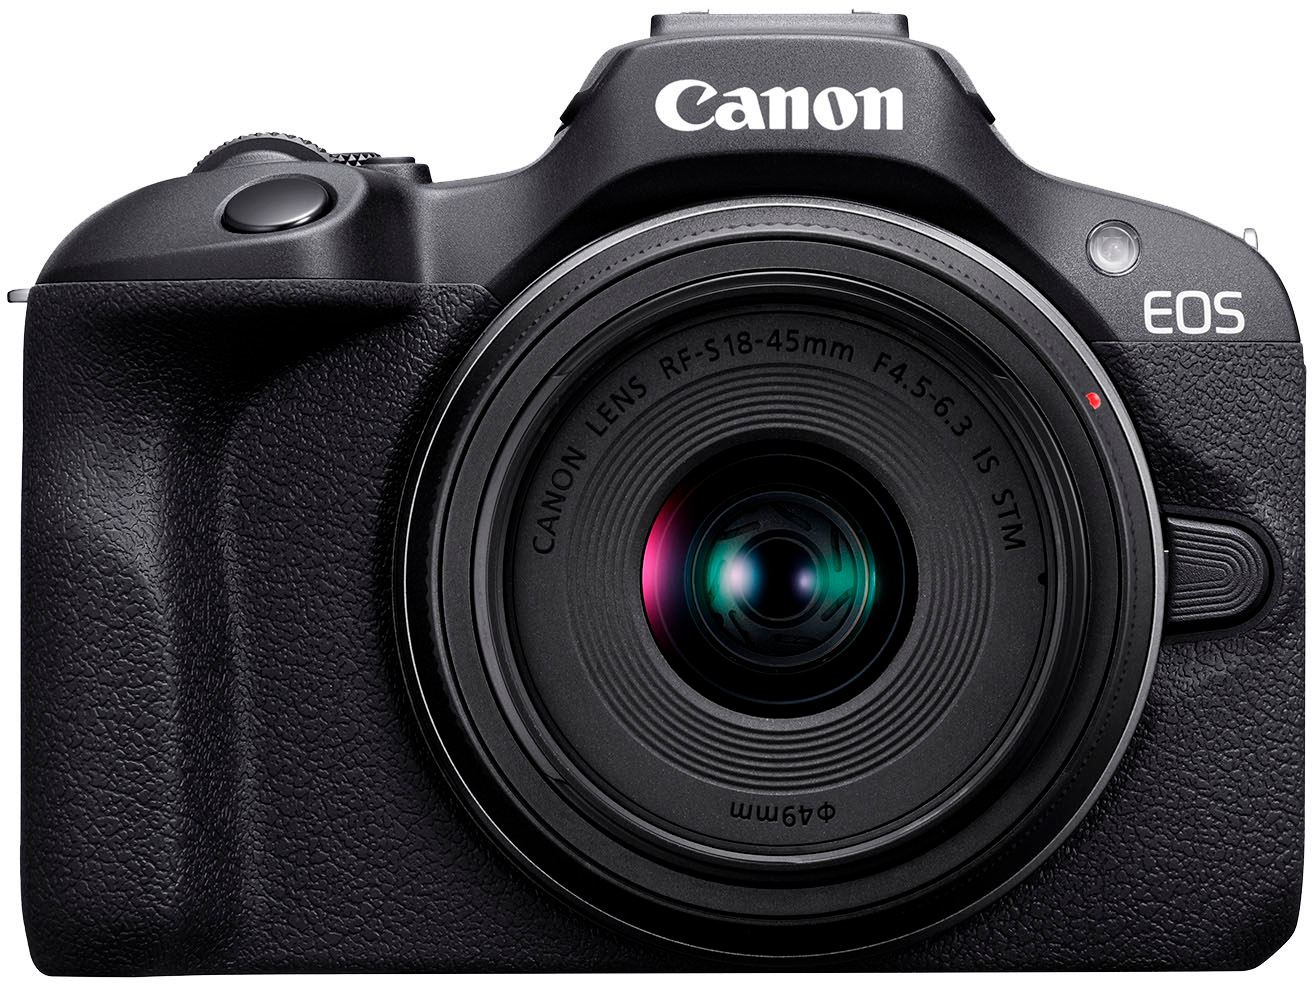 6 Things You Didn't Know You Could Do with a Canon PowerShot